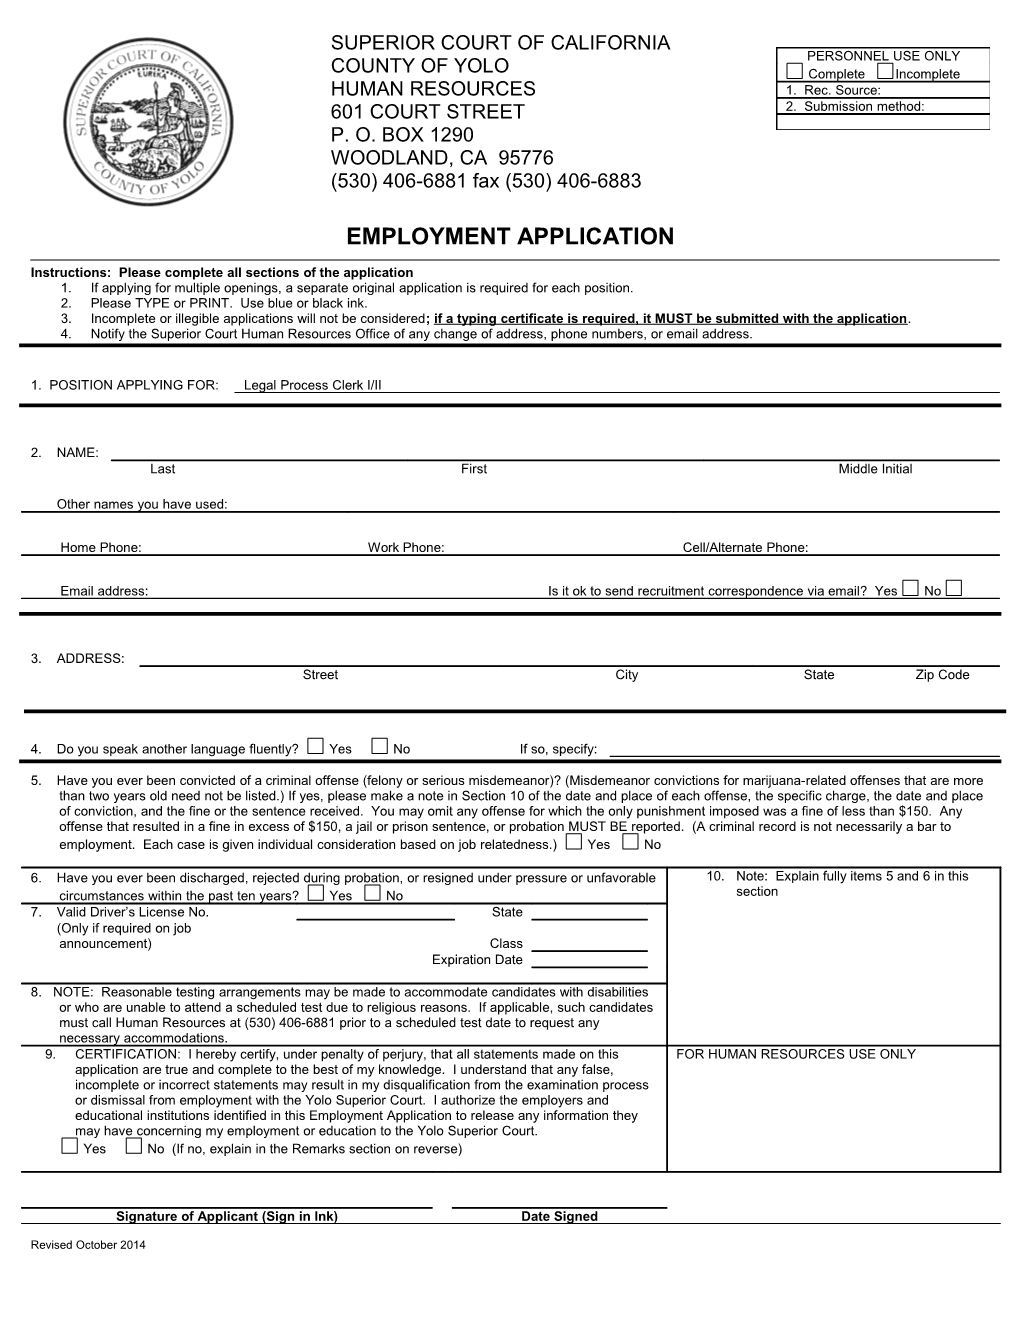 Instructions: Please Complete All Sections of the Application